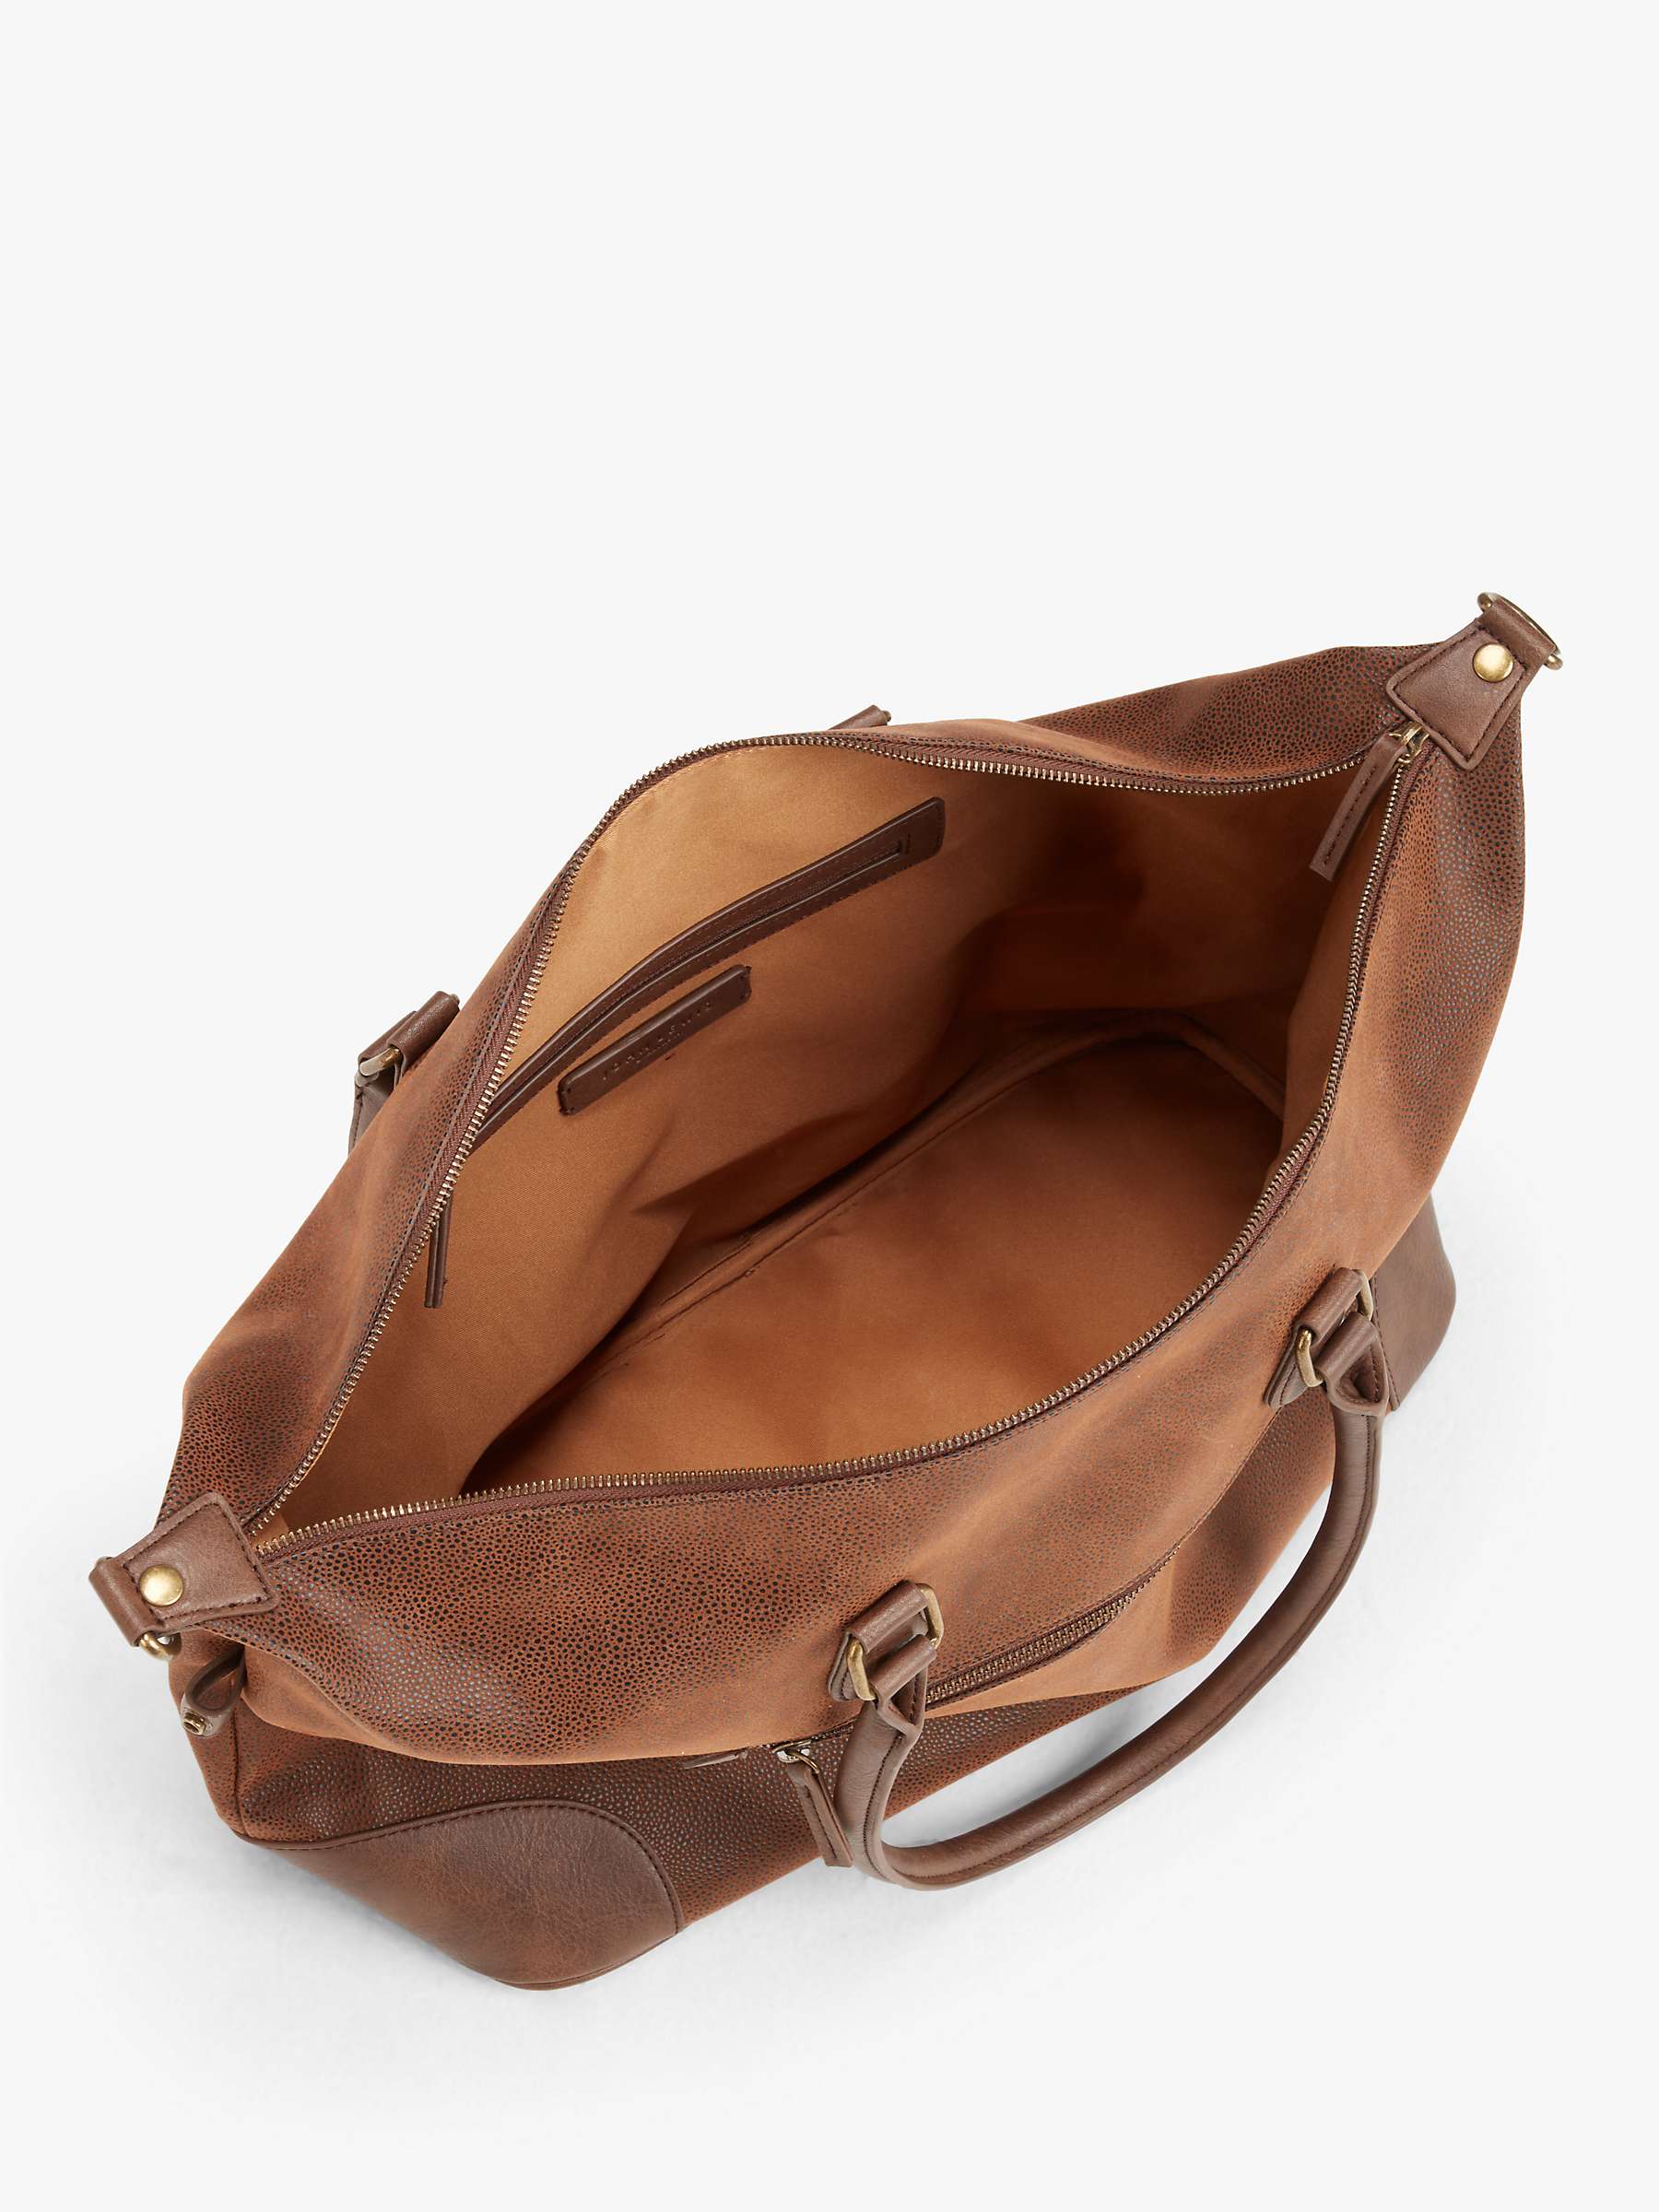 Buy John Lewis Small Cambridge Holdall Online at johnlewis.com